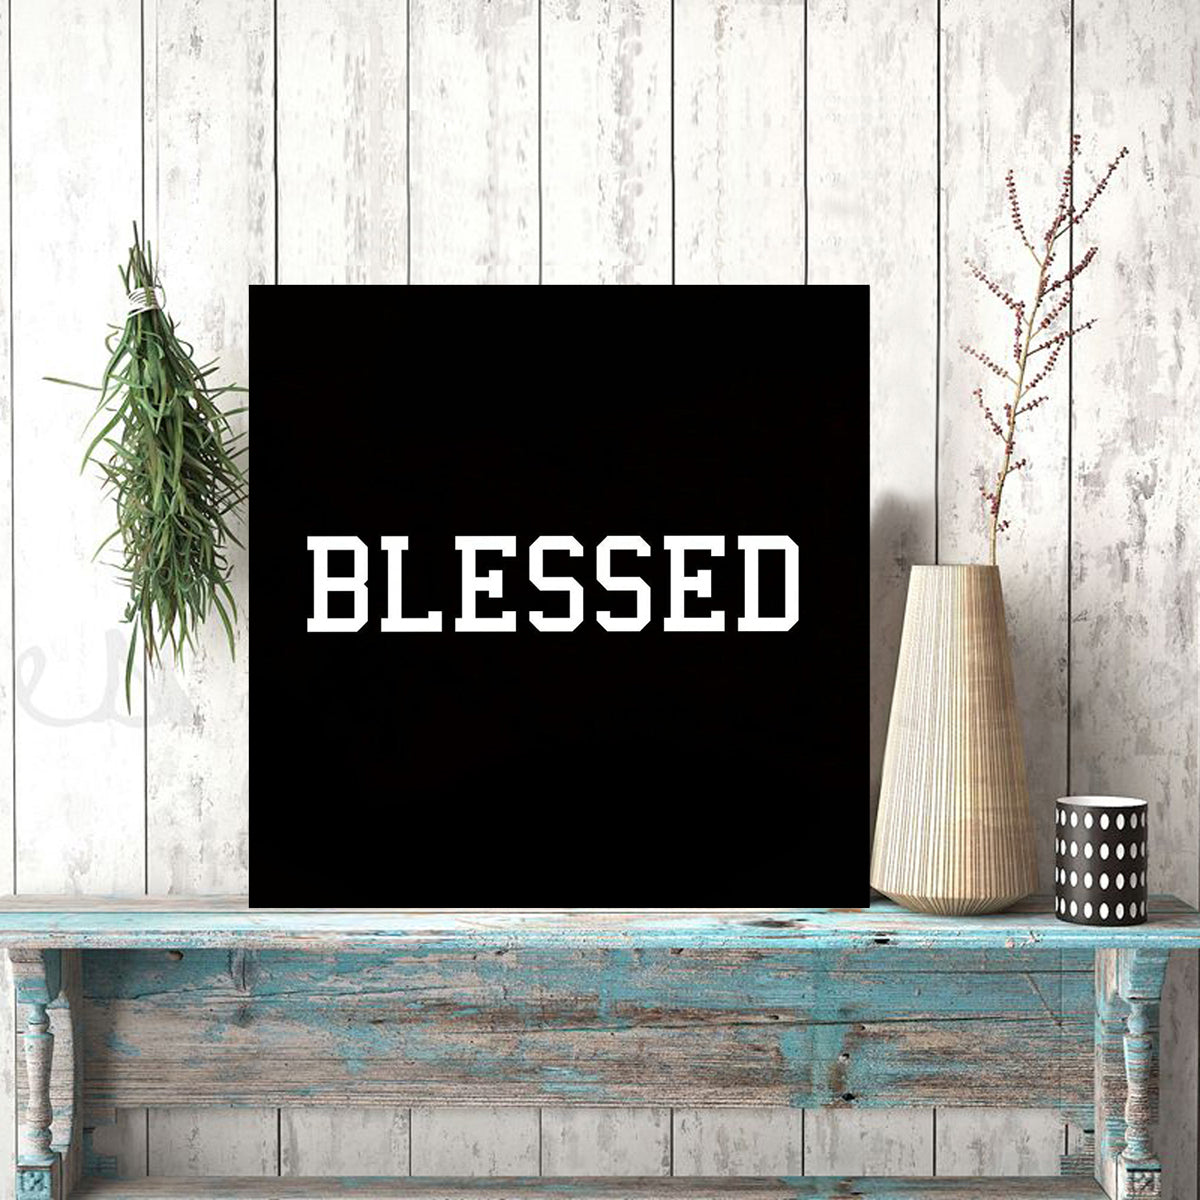 "Blessed" Textured Wall Art Panel In PInewood By Gallery99 (9.5x9.5)Inches